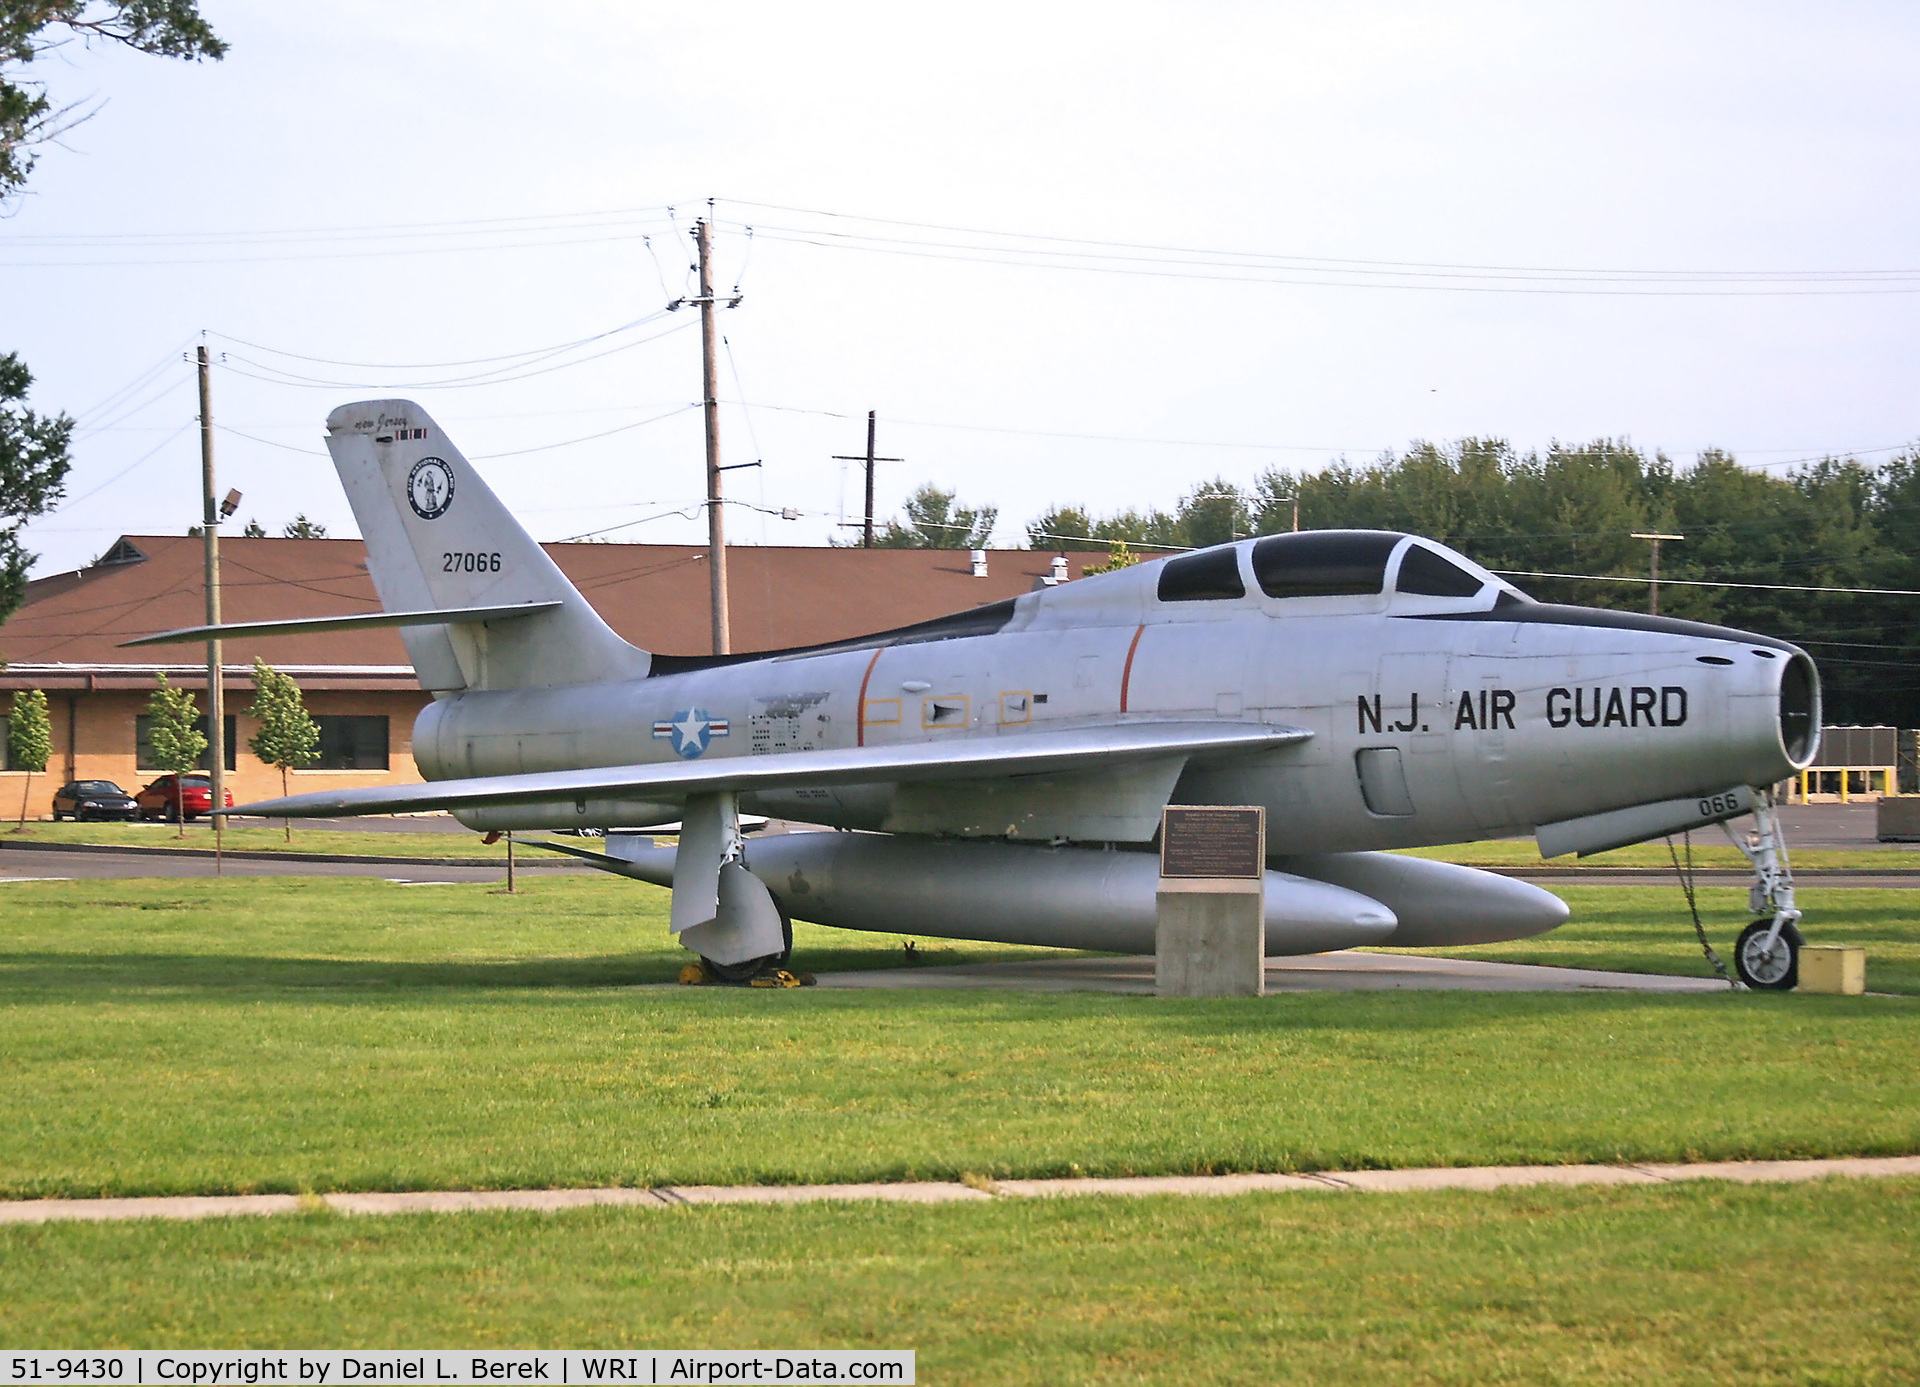 51-9430, 1952 General Motors F-84F-51-GK Thunderstreak C/N Not found 51-9430, Here 51-9430 is shown on display at McGuire AFB with the fictitious serial 52-7066.  That aircraft was scrapped in Colorado.